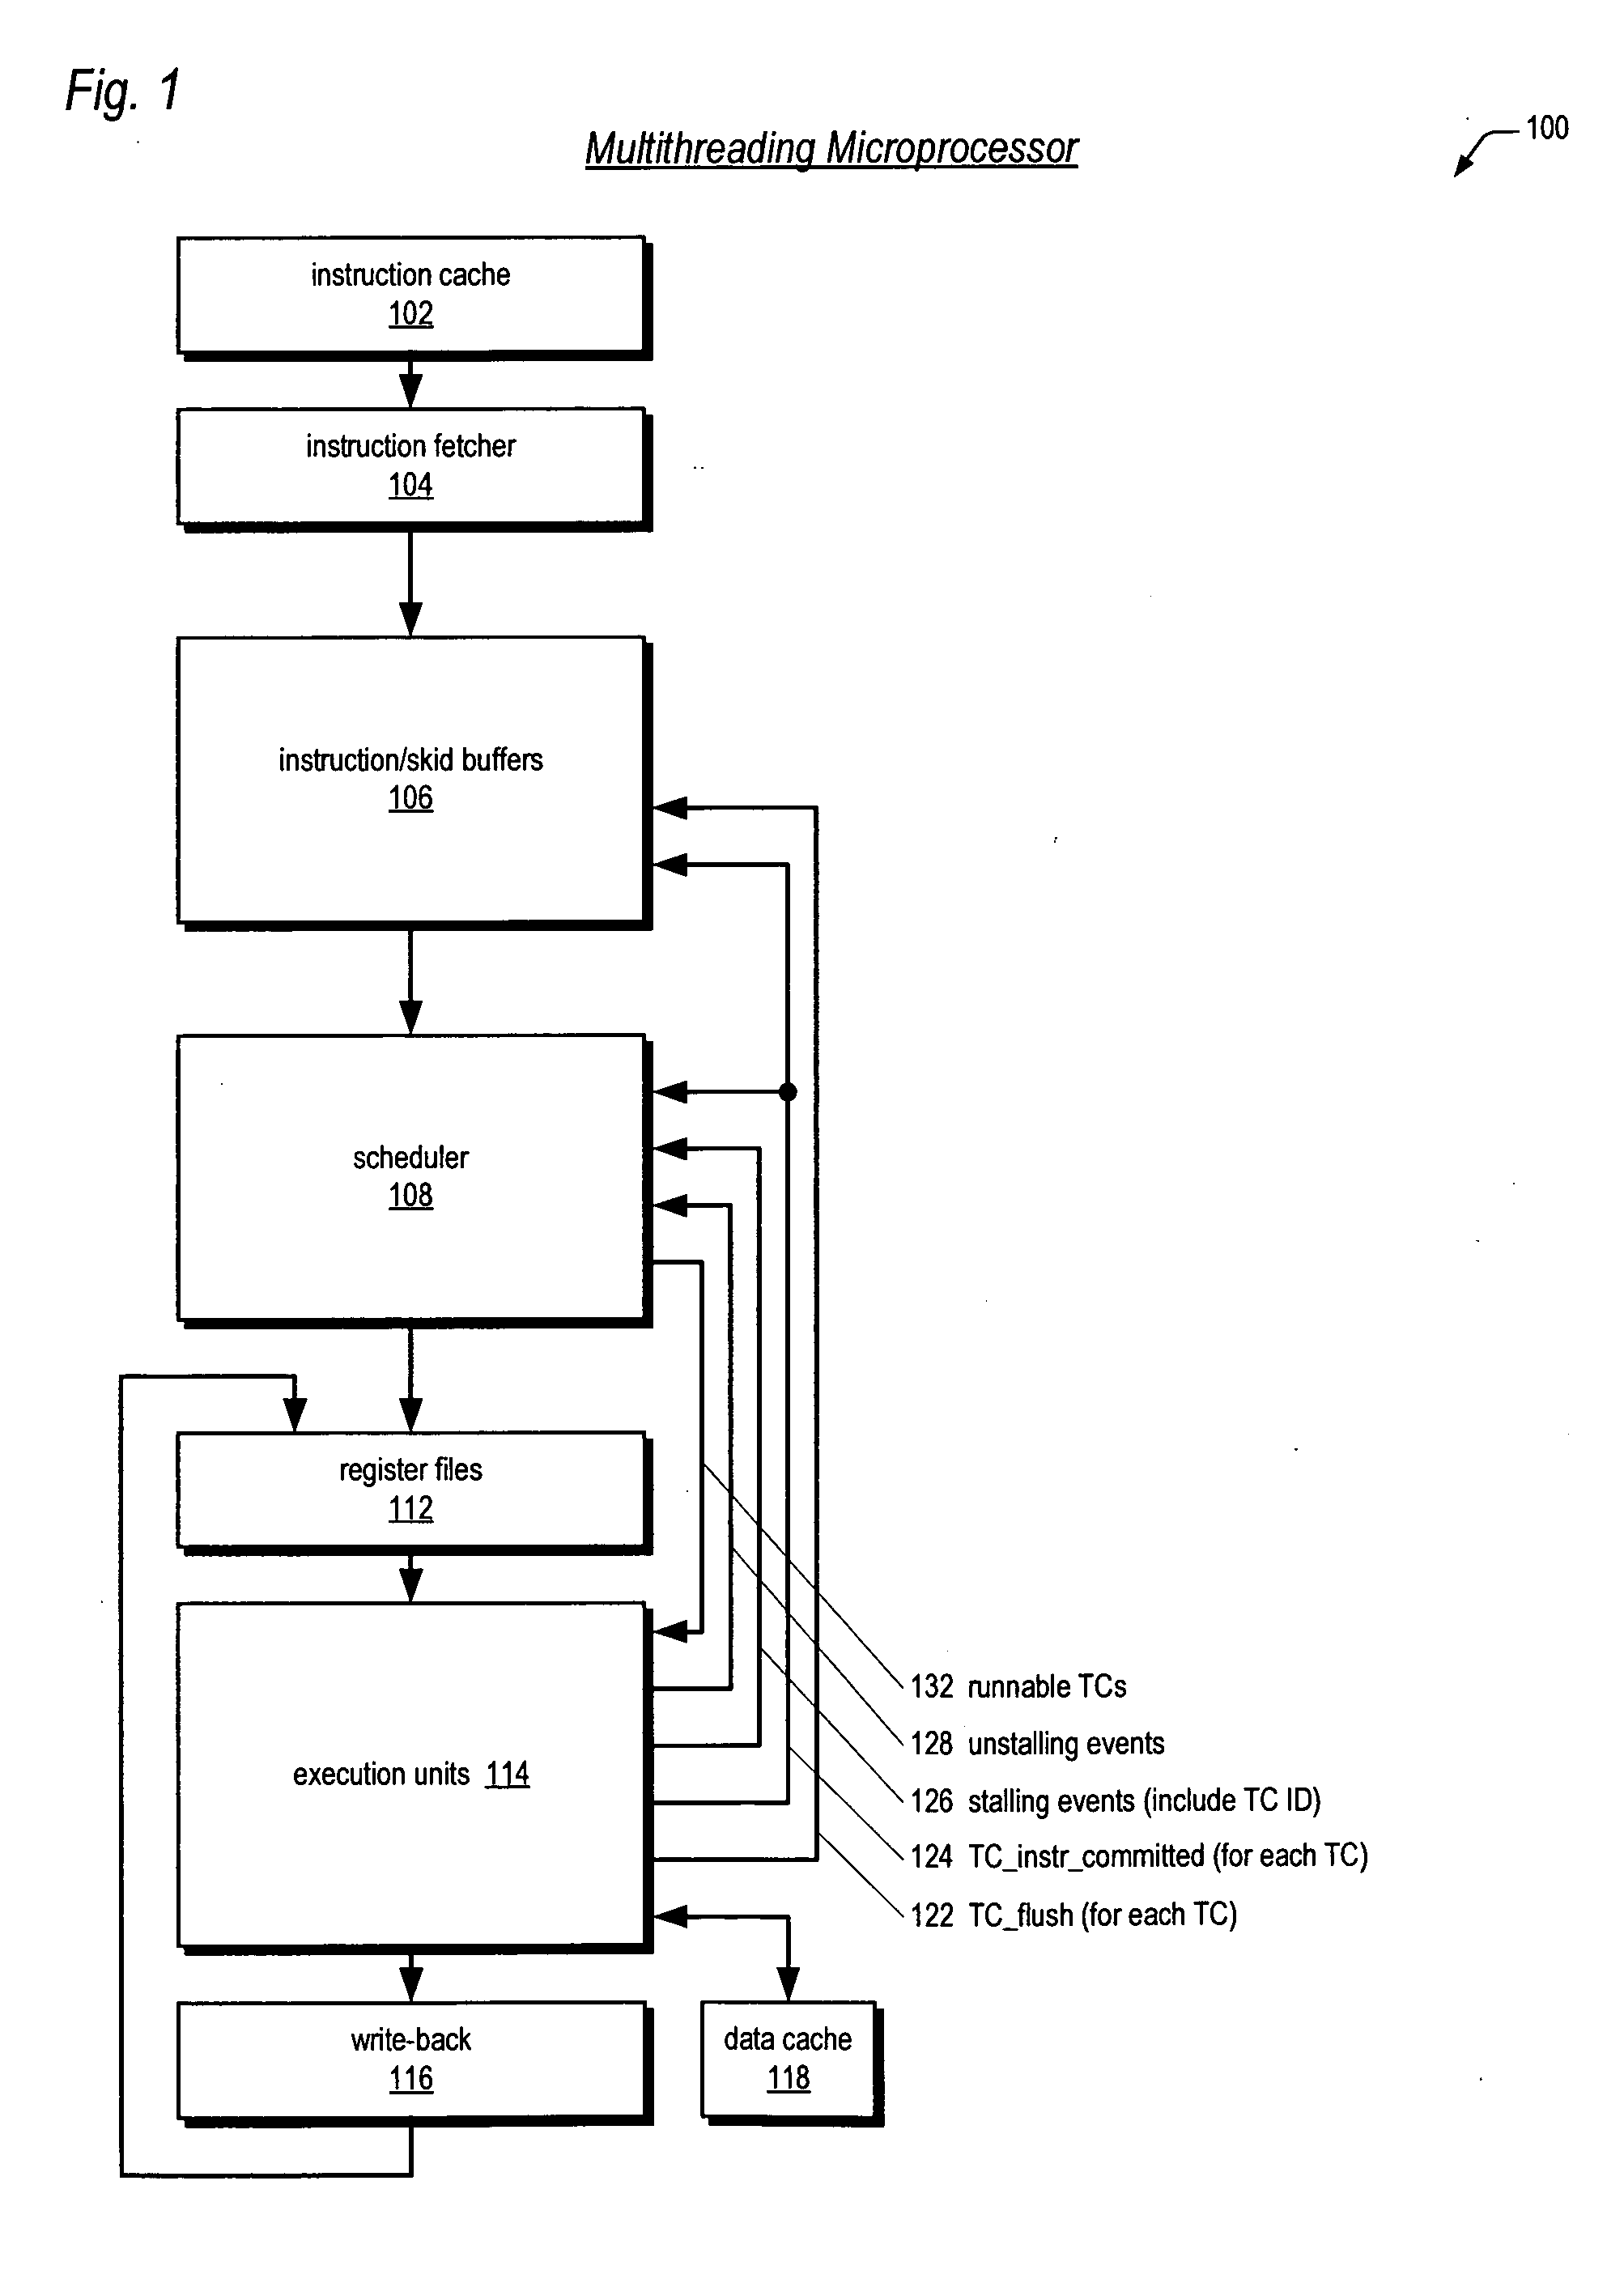 Multithreading microprocessor with optimized thread scheduler for increasing pipeline utilization efficiency